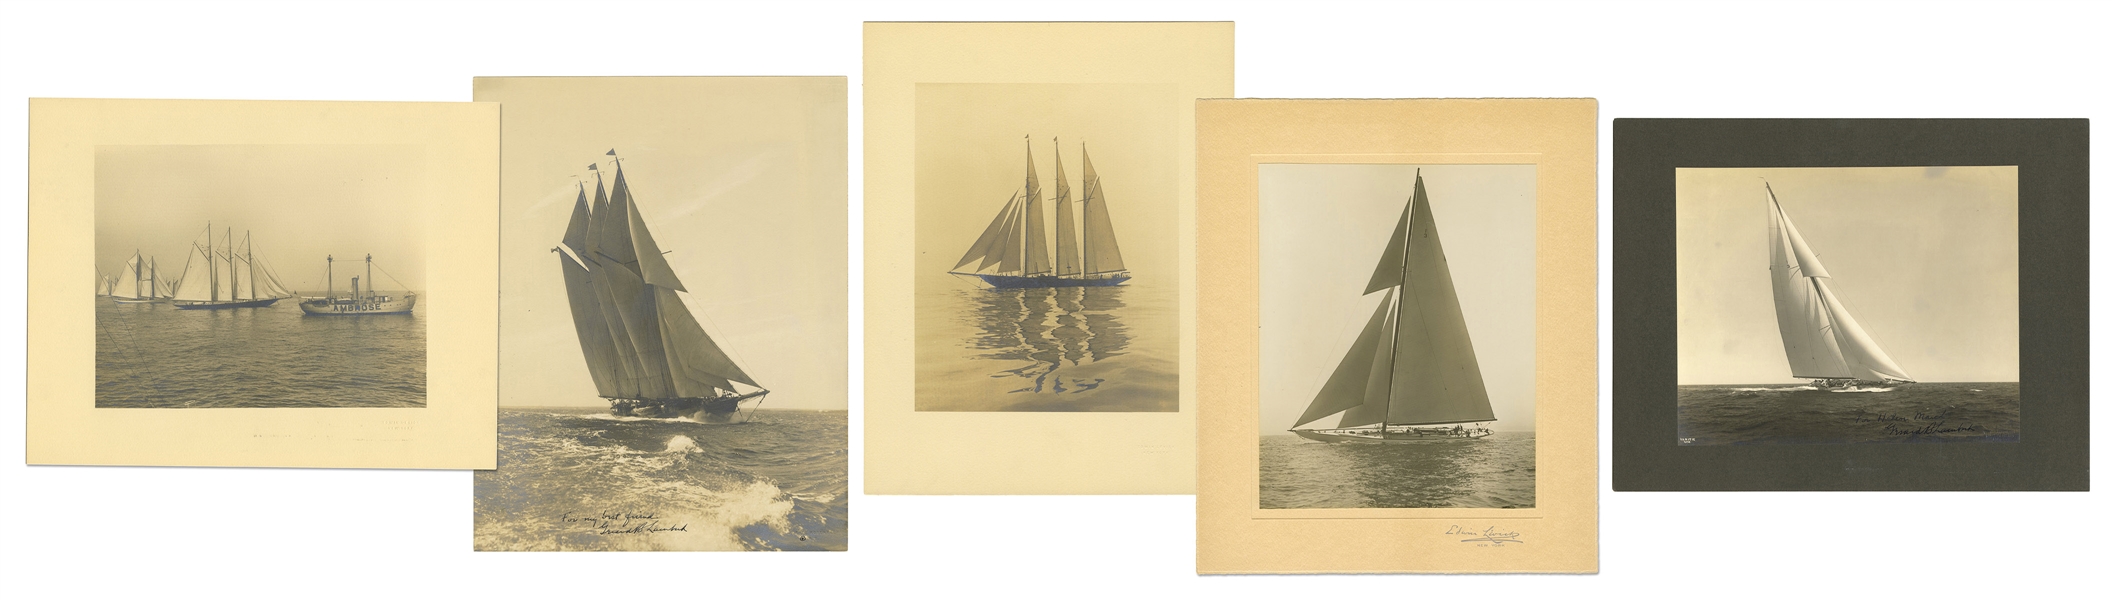  [YACHTING]. A group of 5 large format photographs of sailbo...